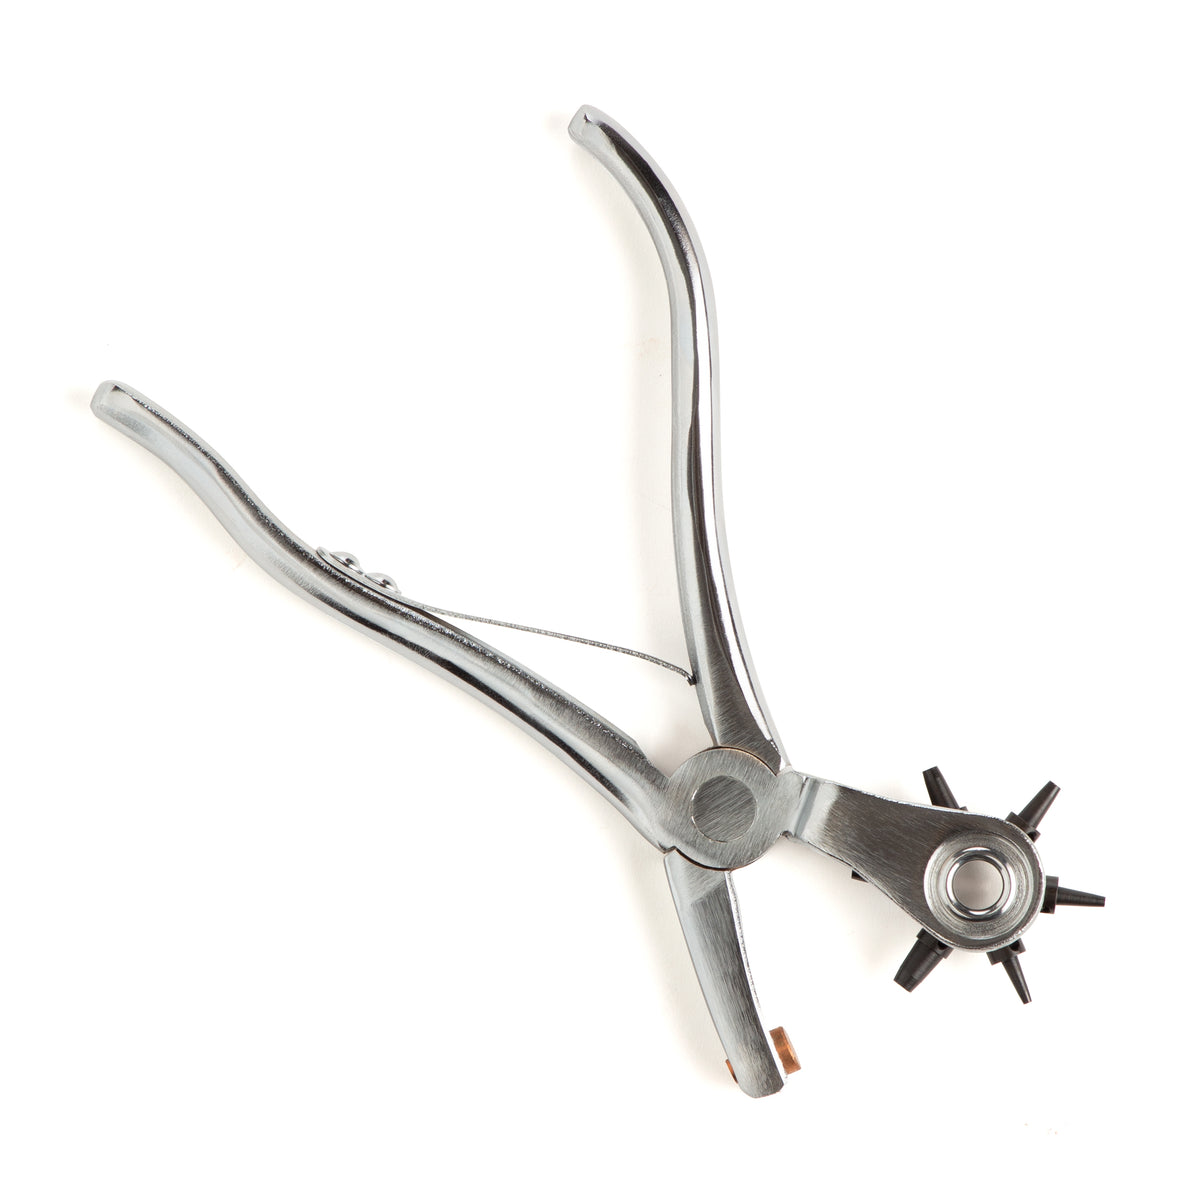 Craftool Razor Plier from Tandy Leather